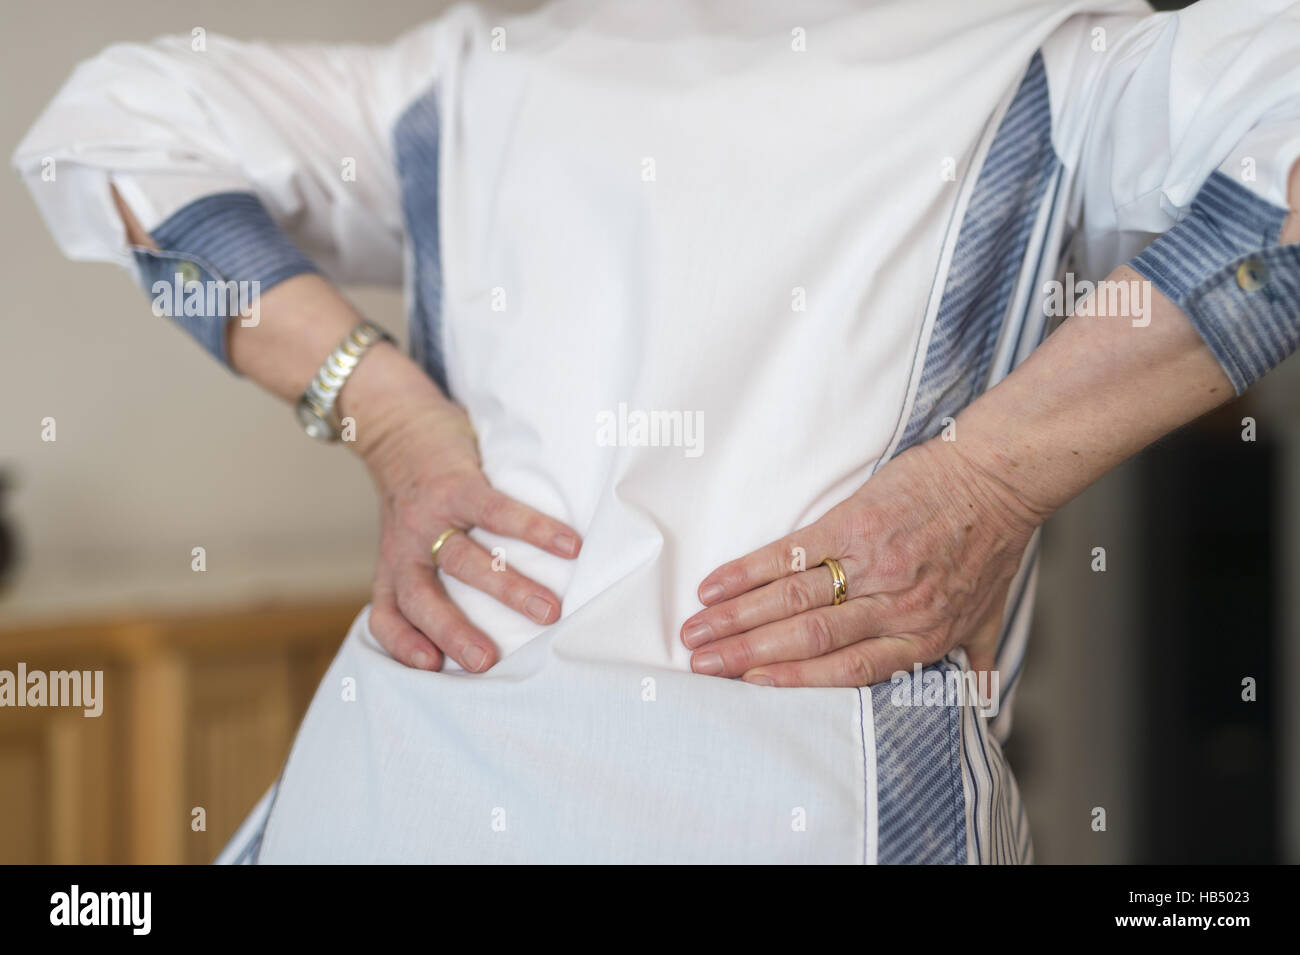 The back supporting a woman's hands. Stock Photo